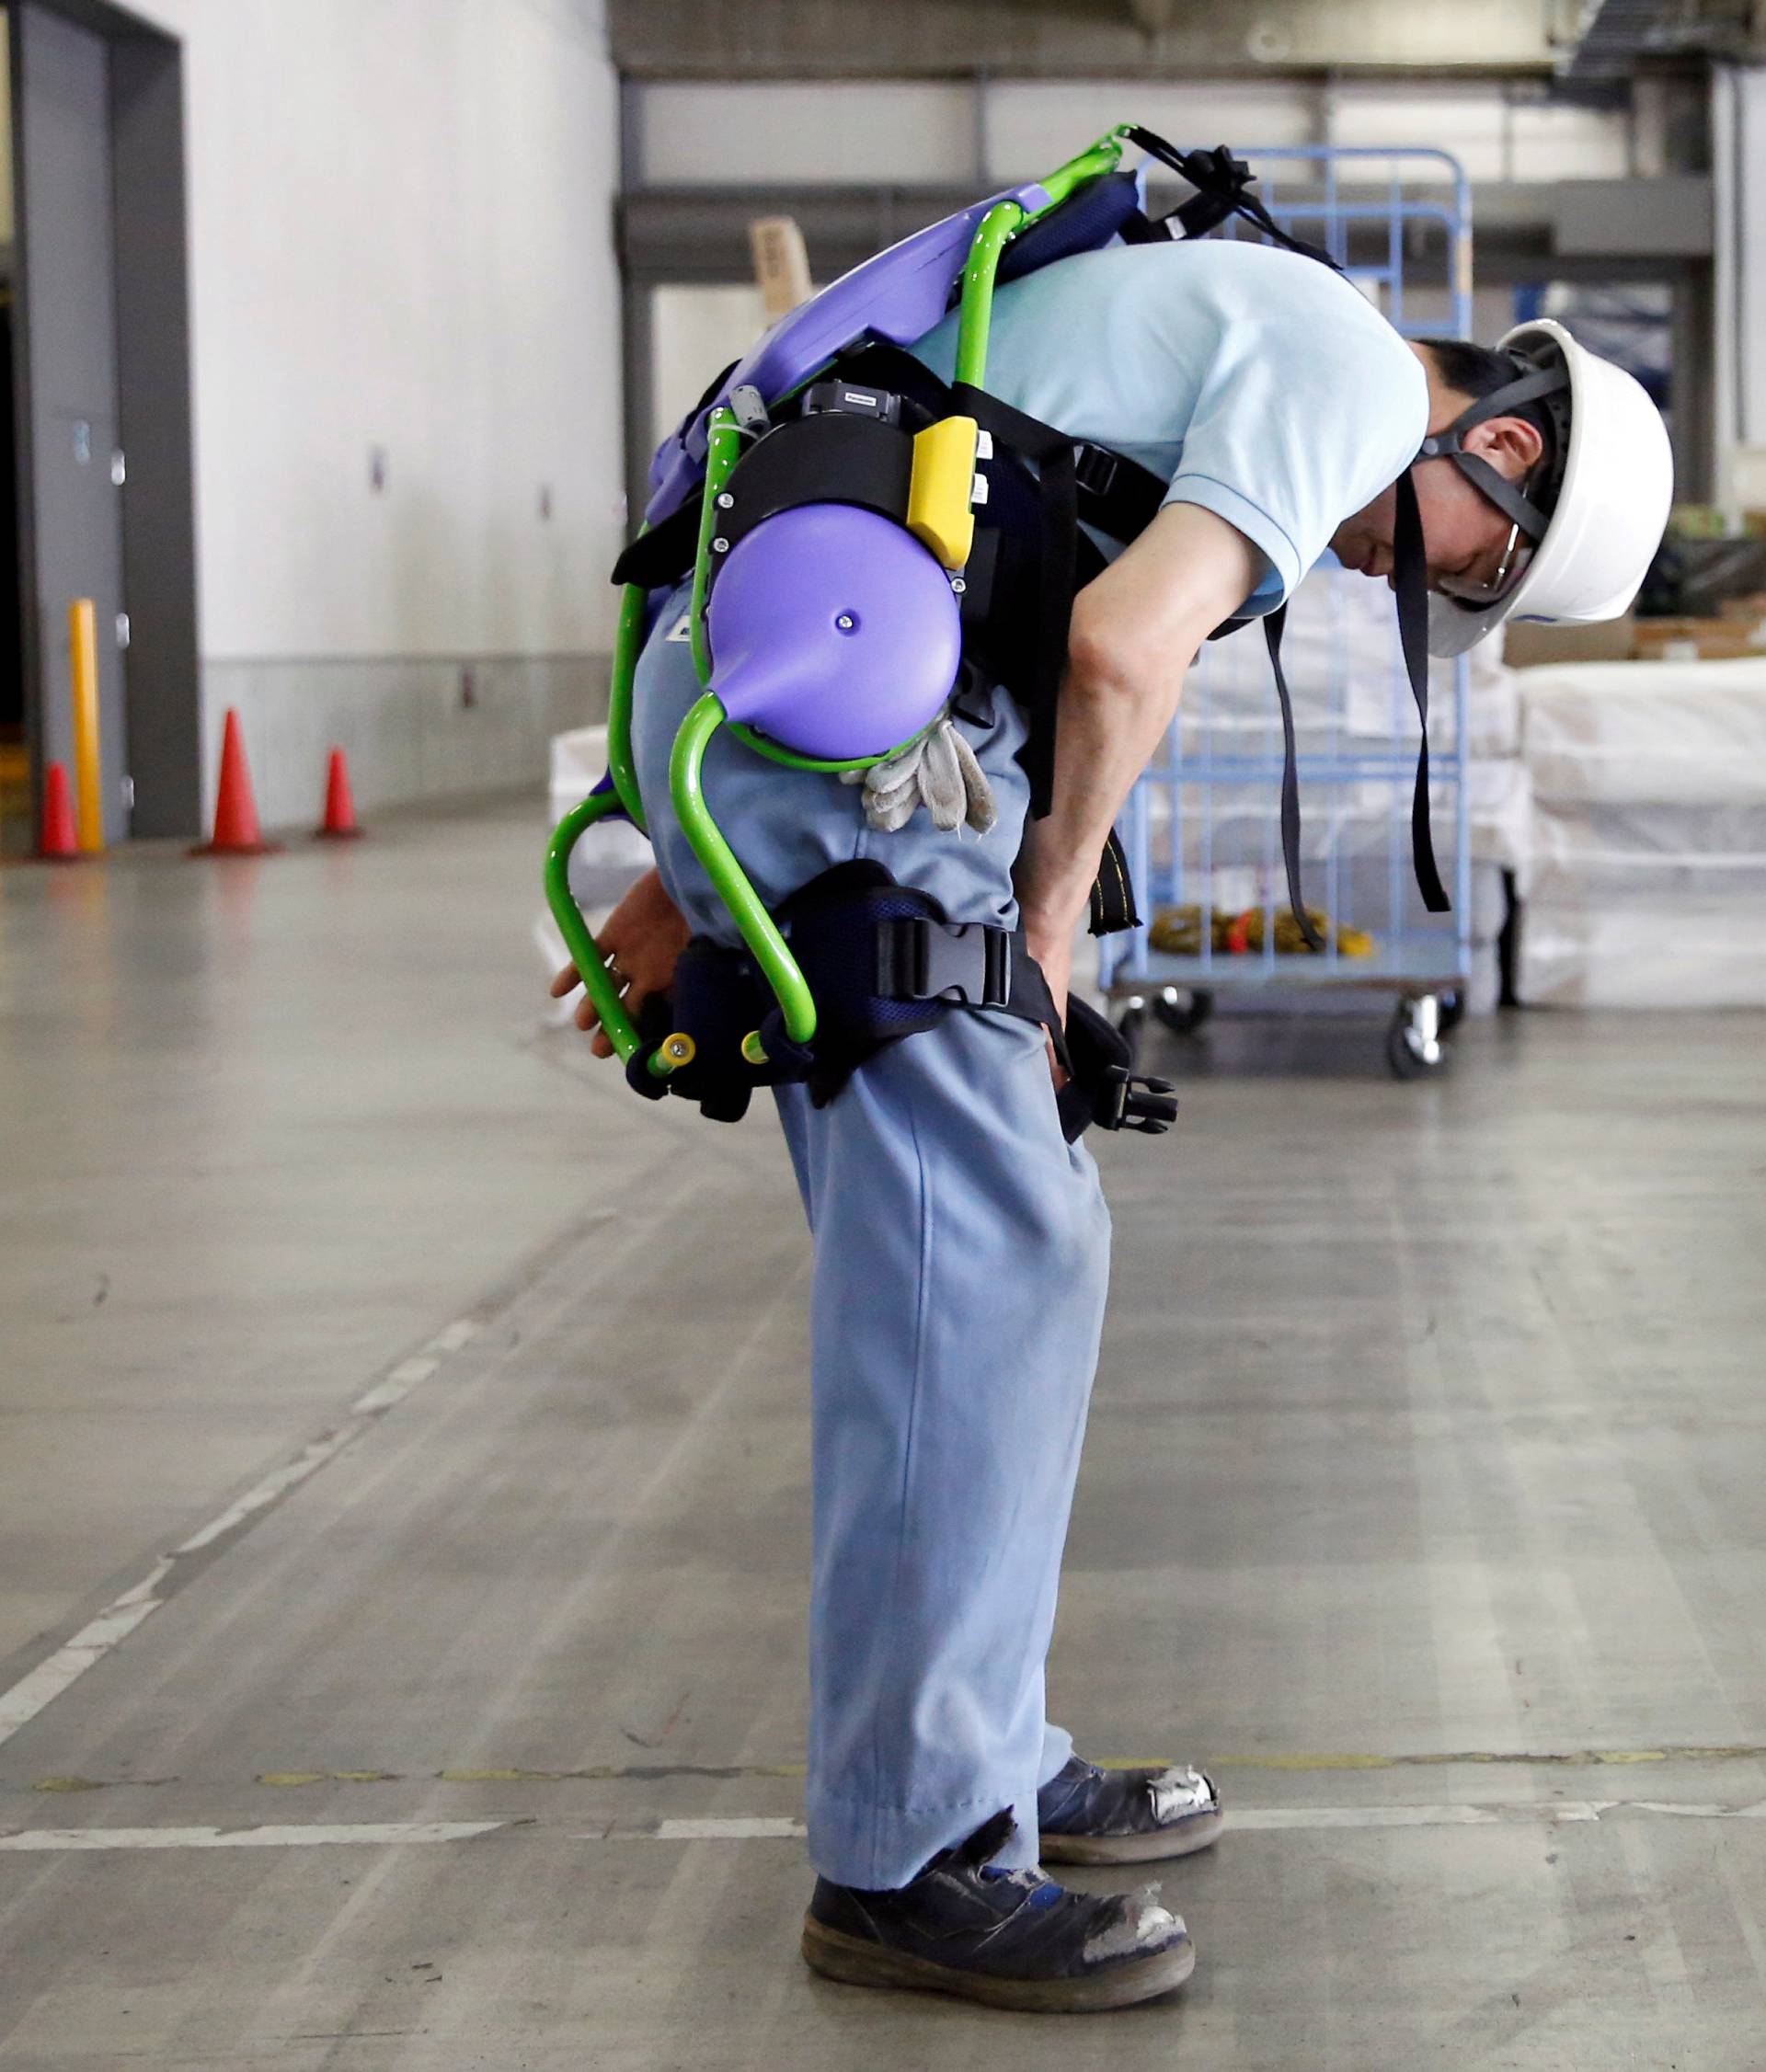 Okutani, 57, a contract worker of Ueda Co., Ltd., wears an Atoun Inc. Power Assist Suit at a distribution center in Kawasaki